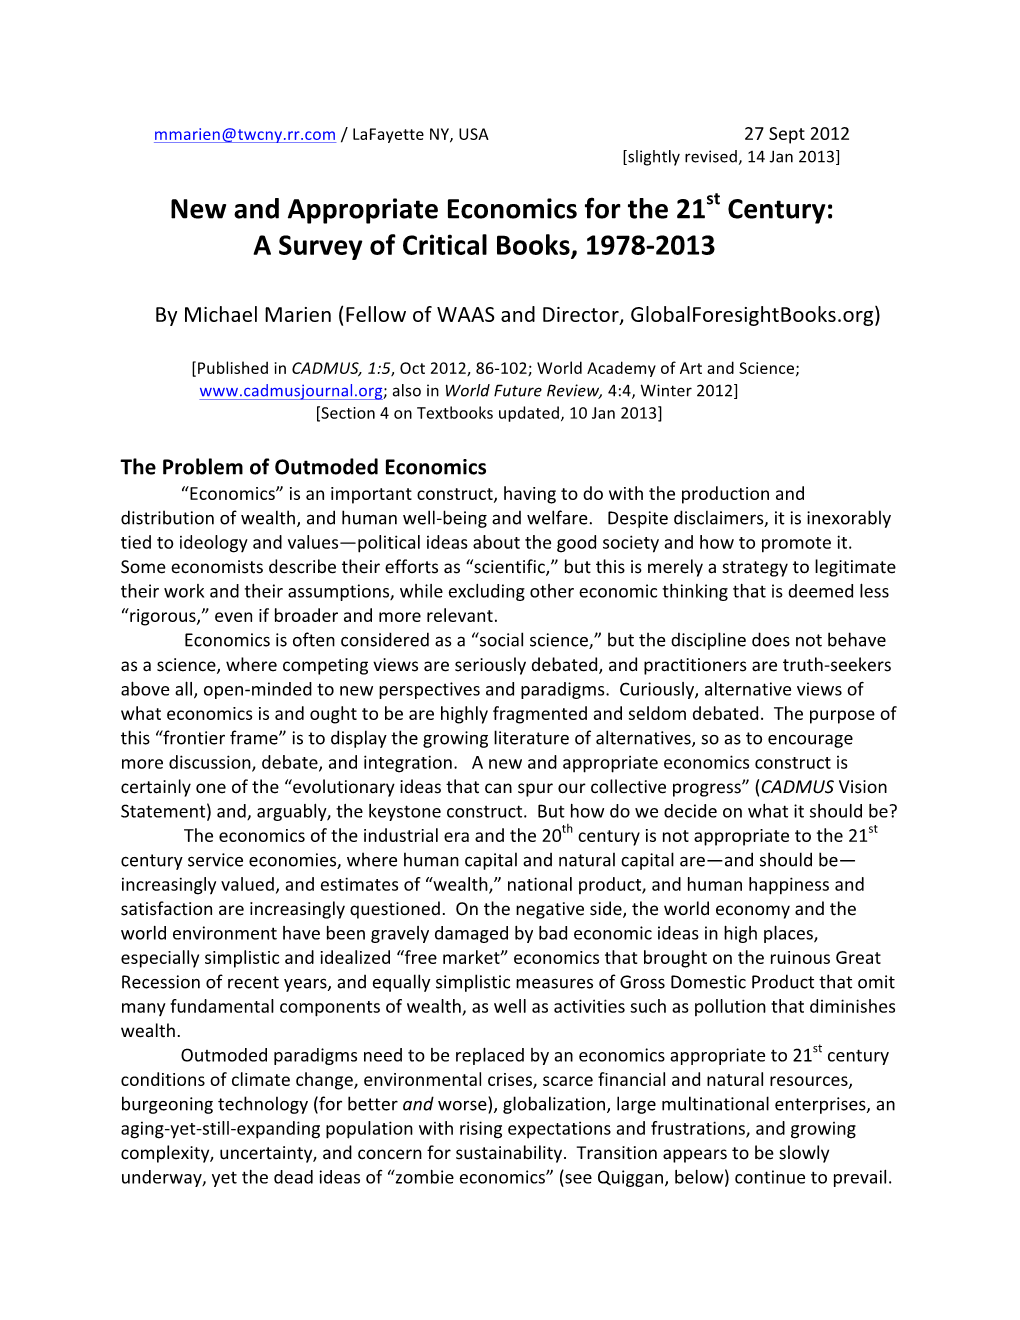 New and Appropriate Economics for the 21St Century